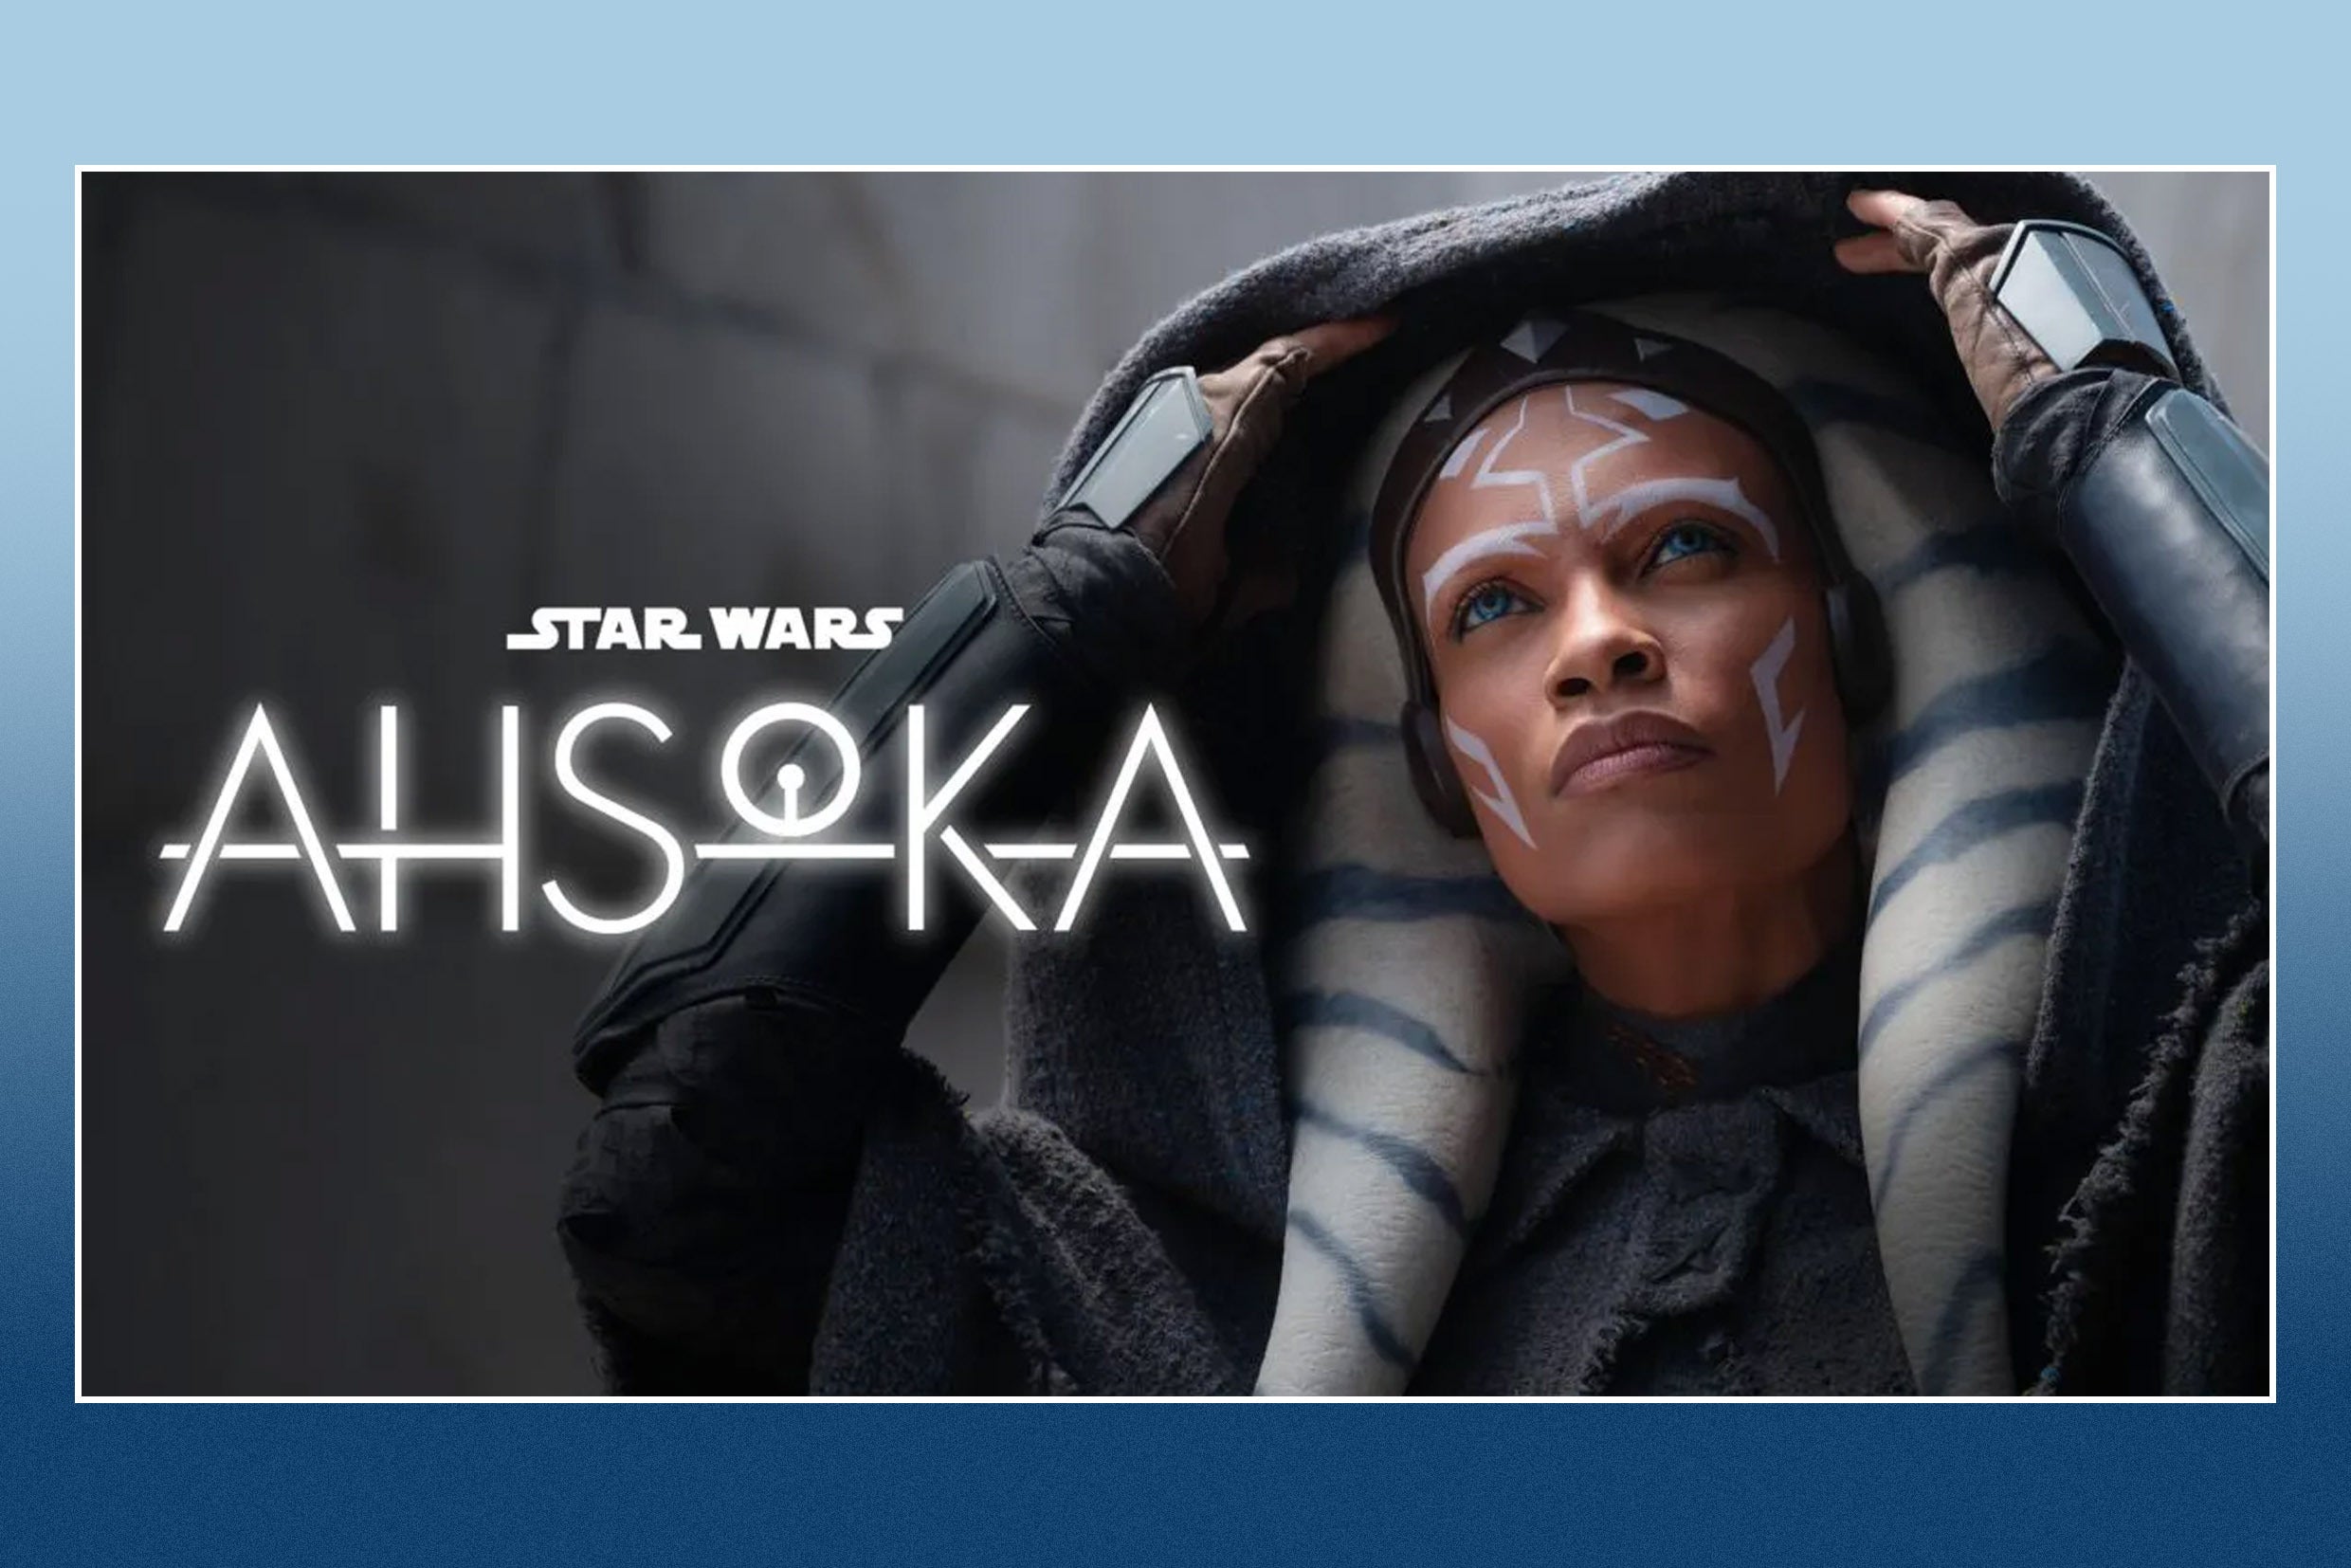 Watch Star Wars: Ahsoka: Where to stream online in the UK | The Independent